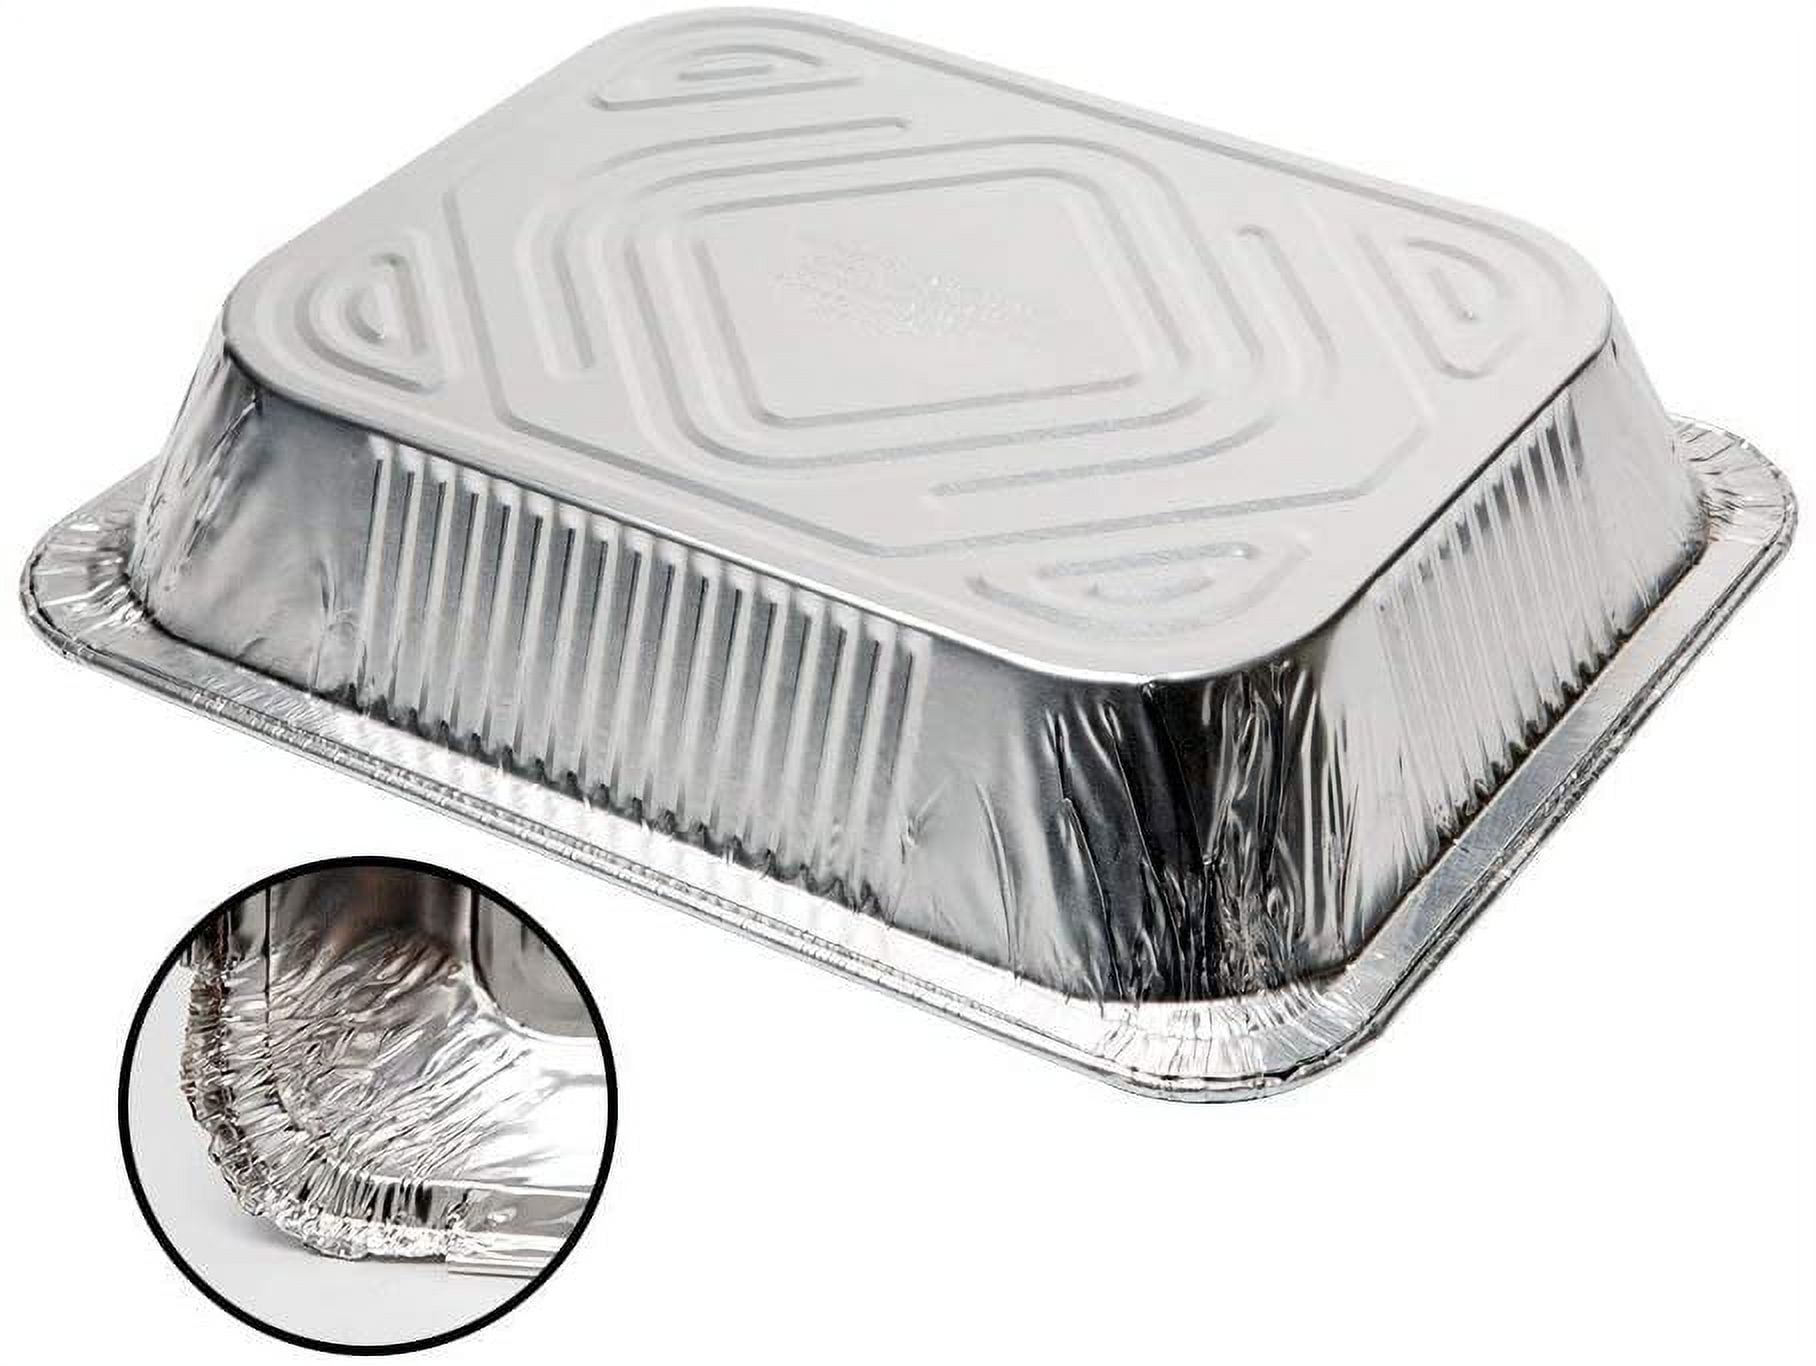 Lavo Home Durable Disposable Aluminium Foil Steam Roaster Baking Pans 21x13x3.5 Inches, Size: 21 x 13 x 3.5, Silver